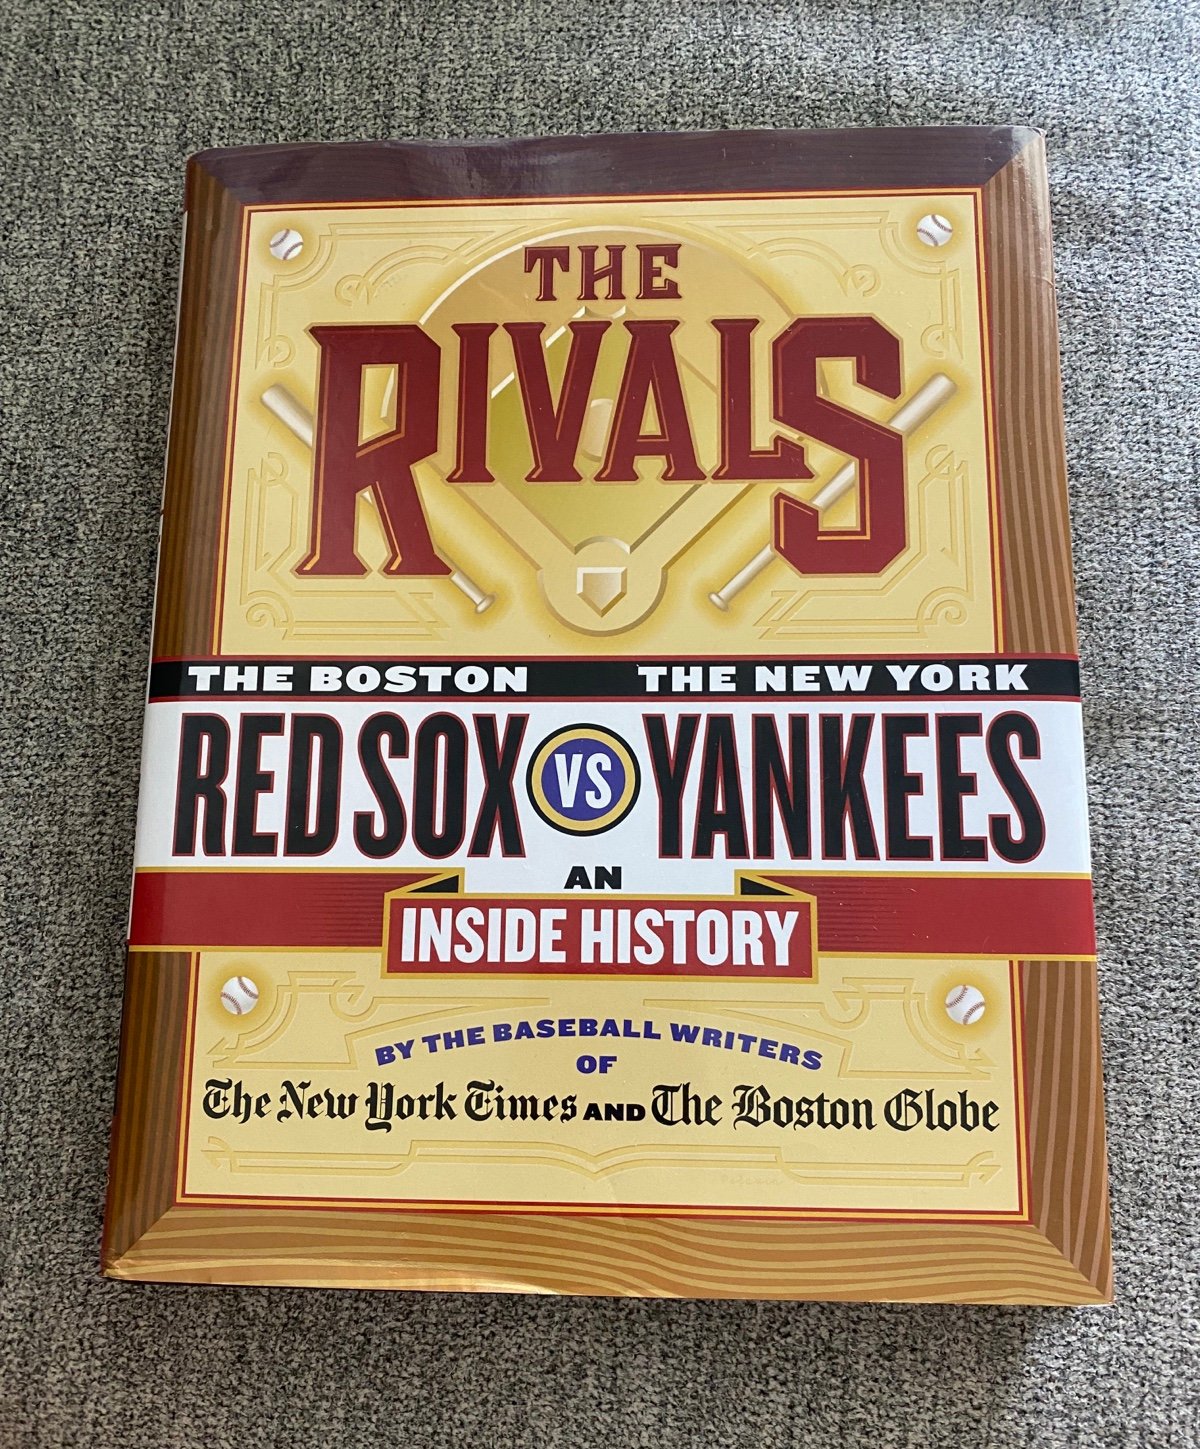 The Rivals The Boston Red Sox vs The New York Yankees a